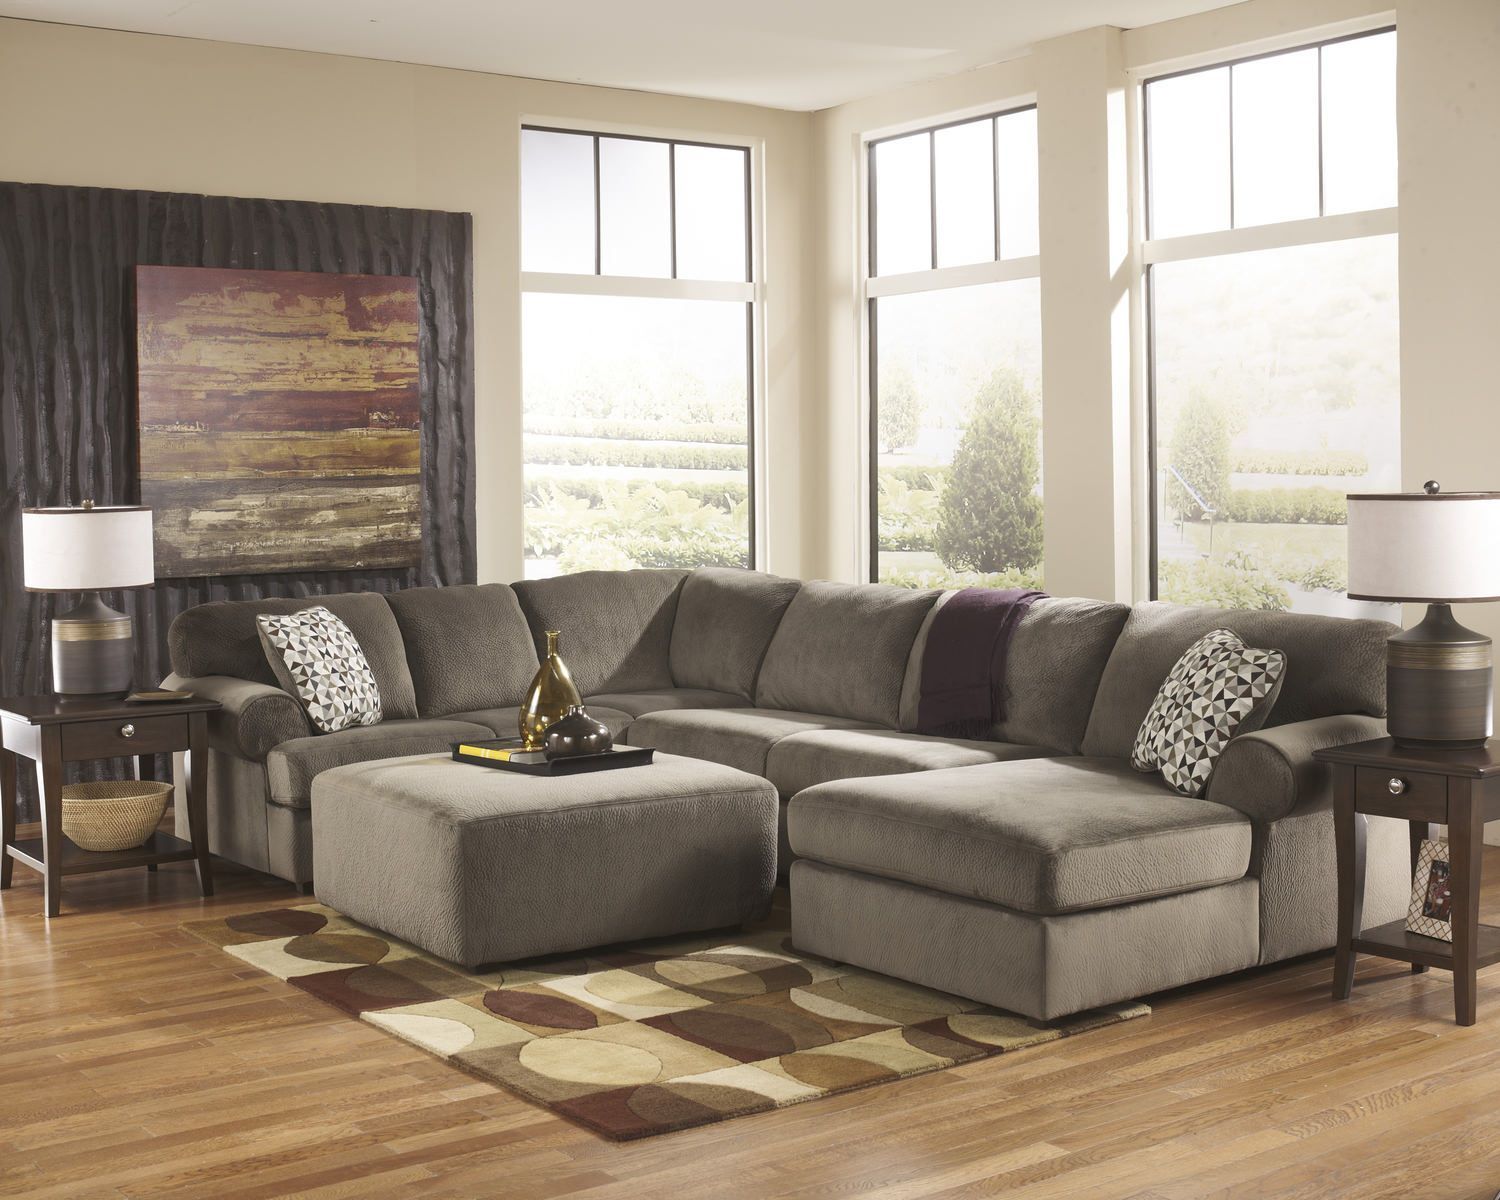 Coach 3 Piece Sectional – Dune | Sectional Living Room Sets, Elegant Within 3 Piece Console Tables (View 13 of 20)